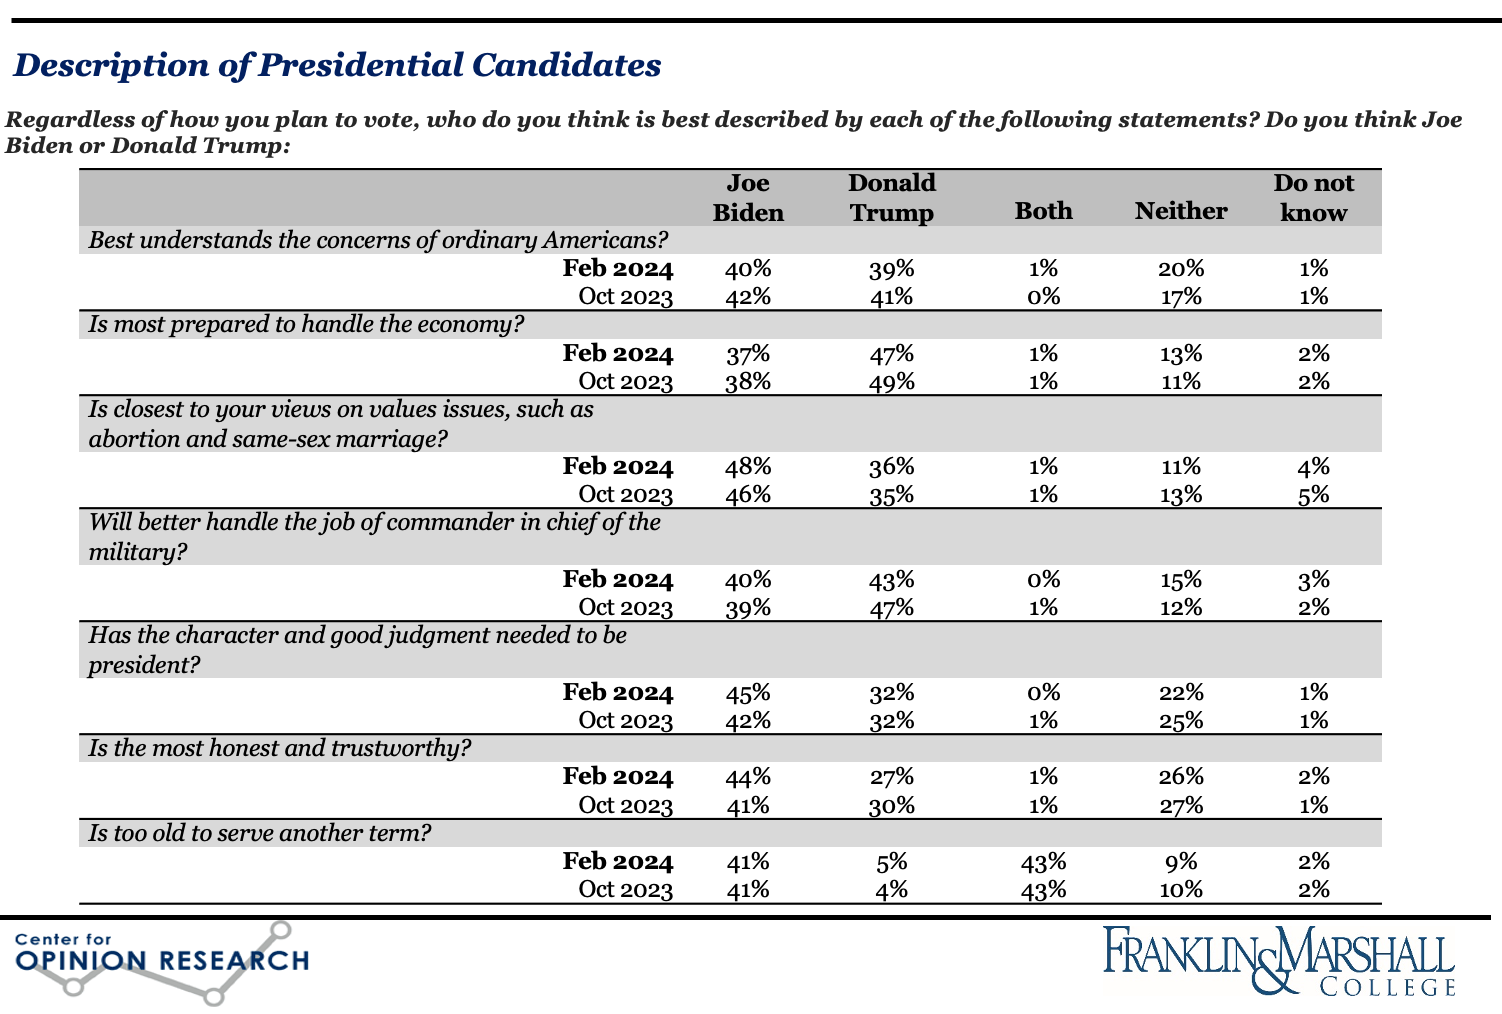 Figure 3. Table using F&M Poll data from February 2024 and October 2023 to show Pennsylvania voters' views on Biden and Trump's values, strengths, and characteristics. Which candidate is better prepared to handle the economy and the job of commander in chief, best understands ordinary Americans, is closer to their views on values issues, is the most honest, and has the character and good judgement to serve another term? Are either or both too old to serve again?